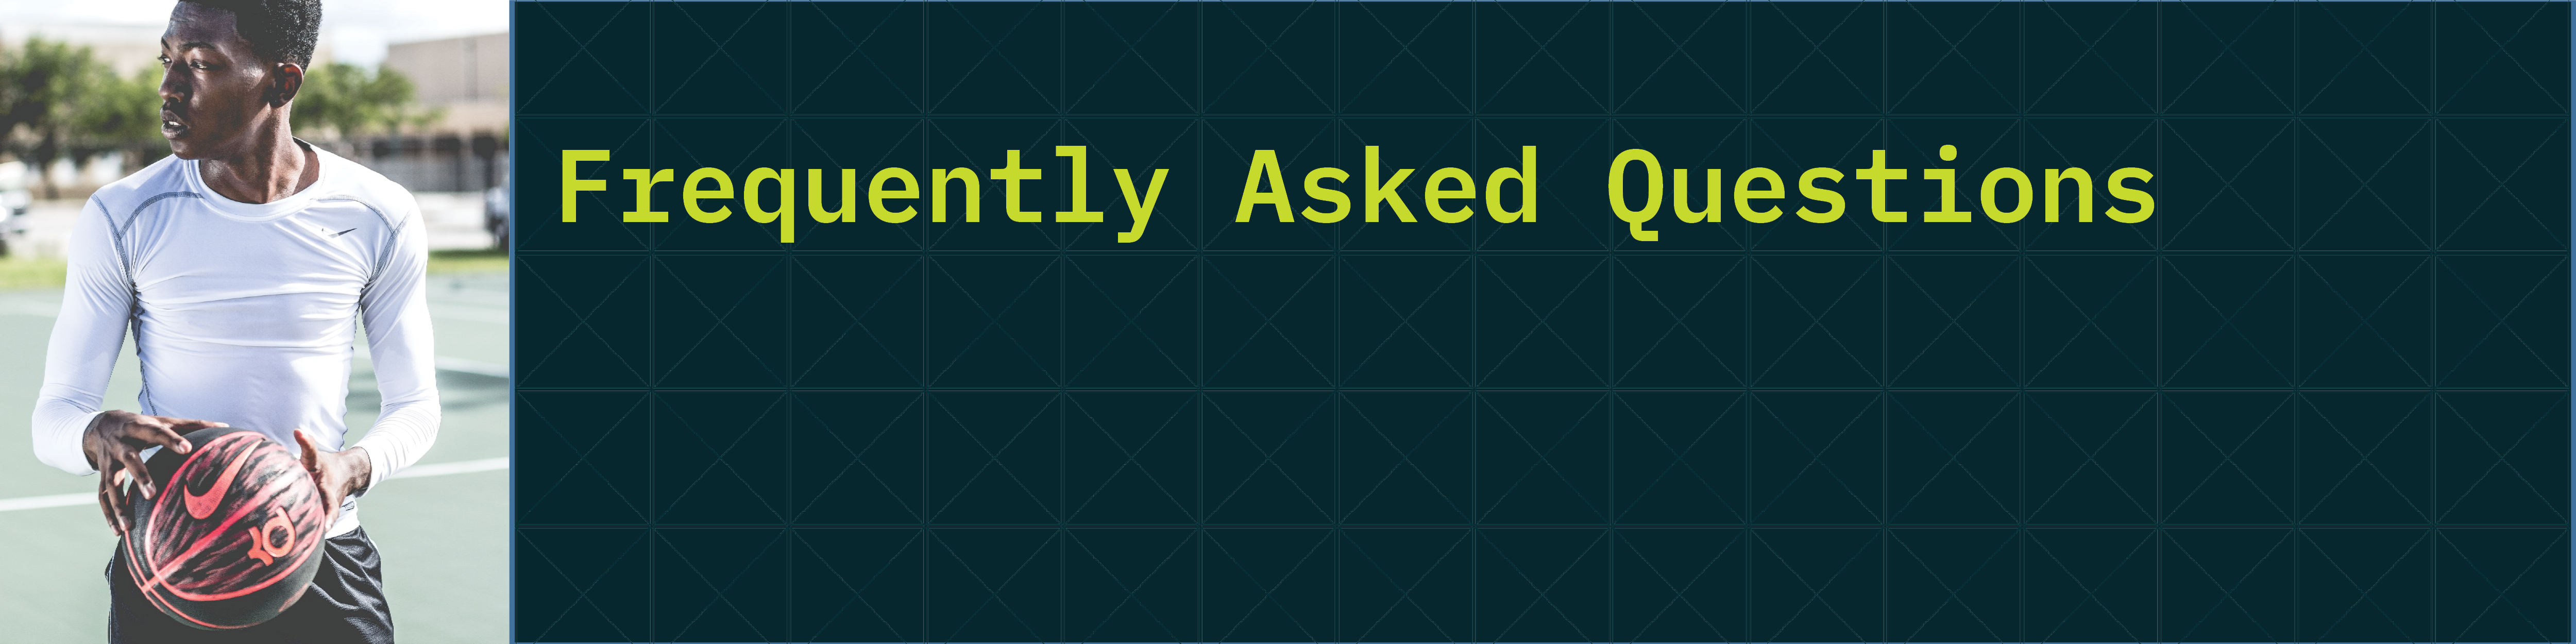 Frequently Asked Questions Header